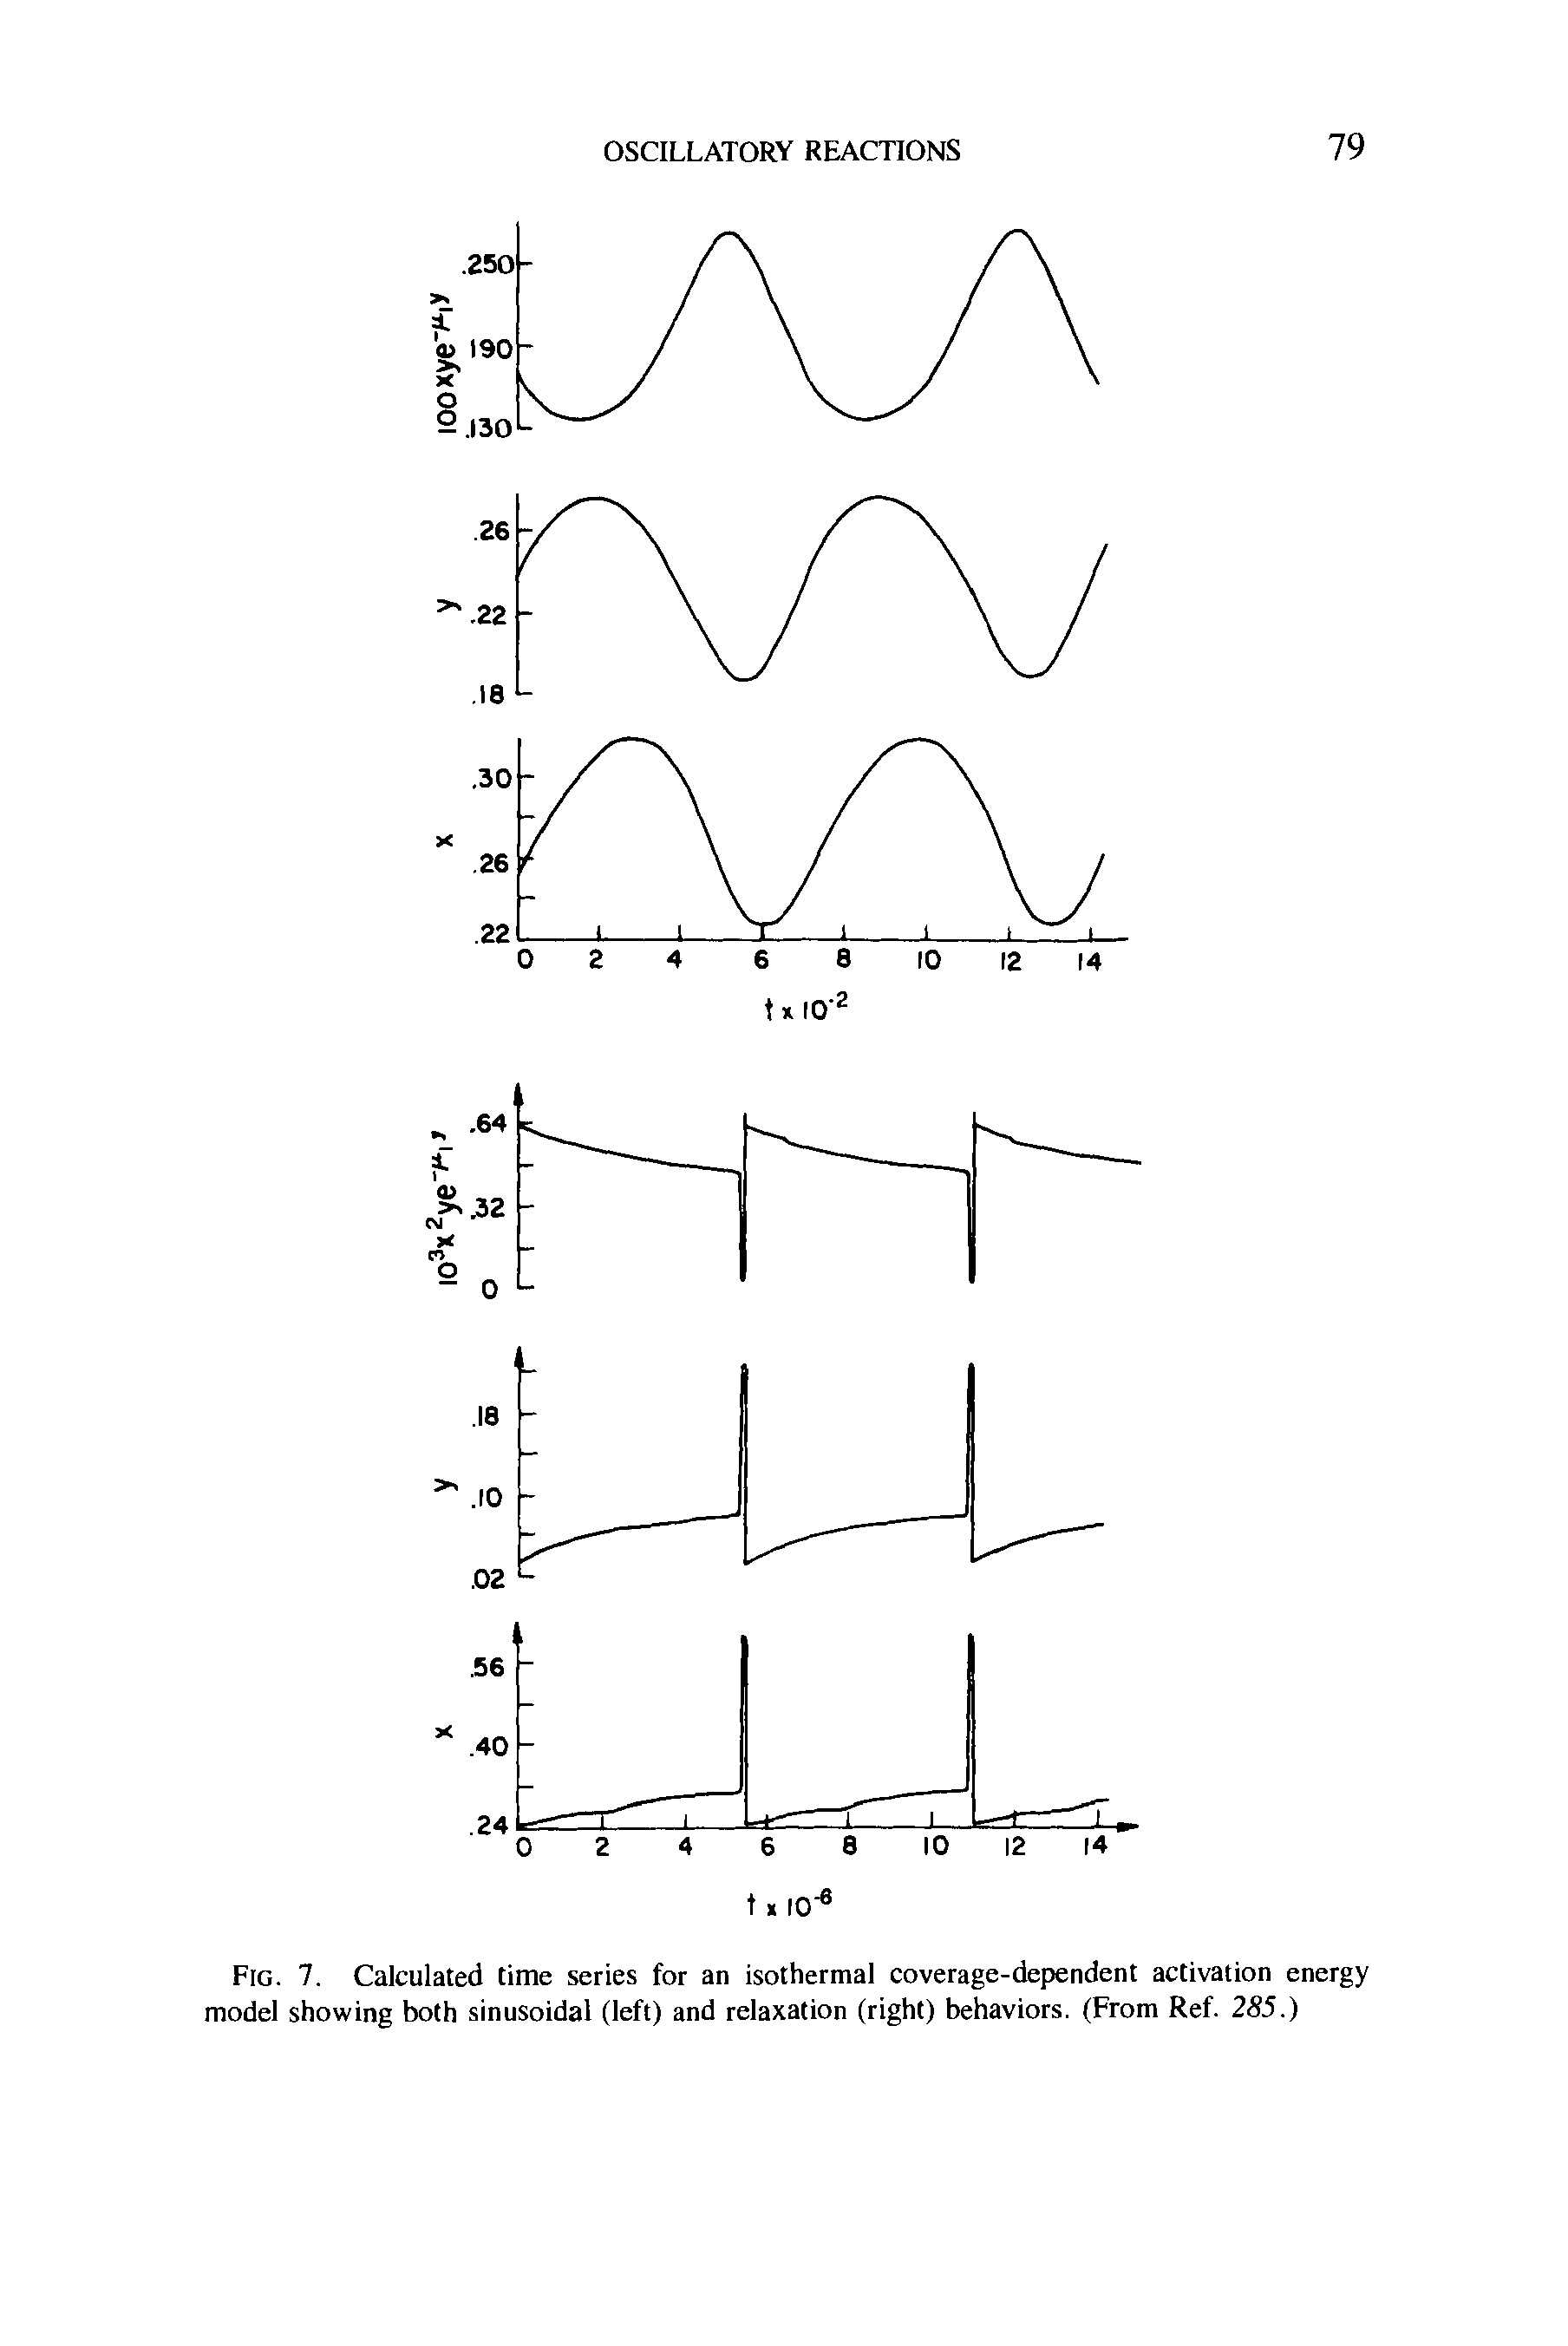 Fig. 7. Calculated time series for an isothermal coverage-dependent activation energy model showing both sinusoidal (left) and relaxation (right) behaviors. (From Ref. 285.)...